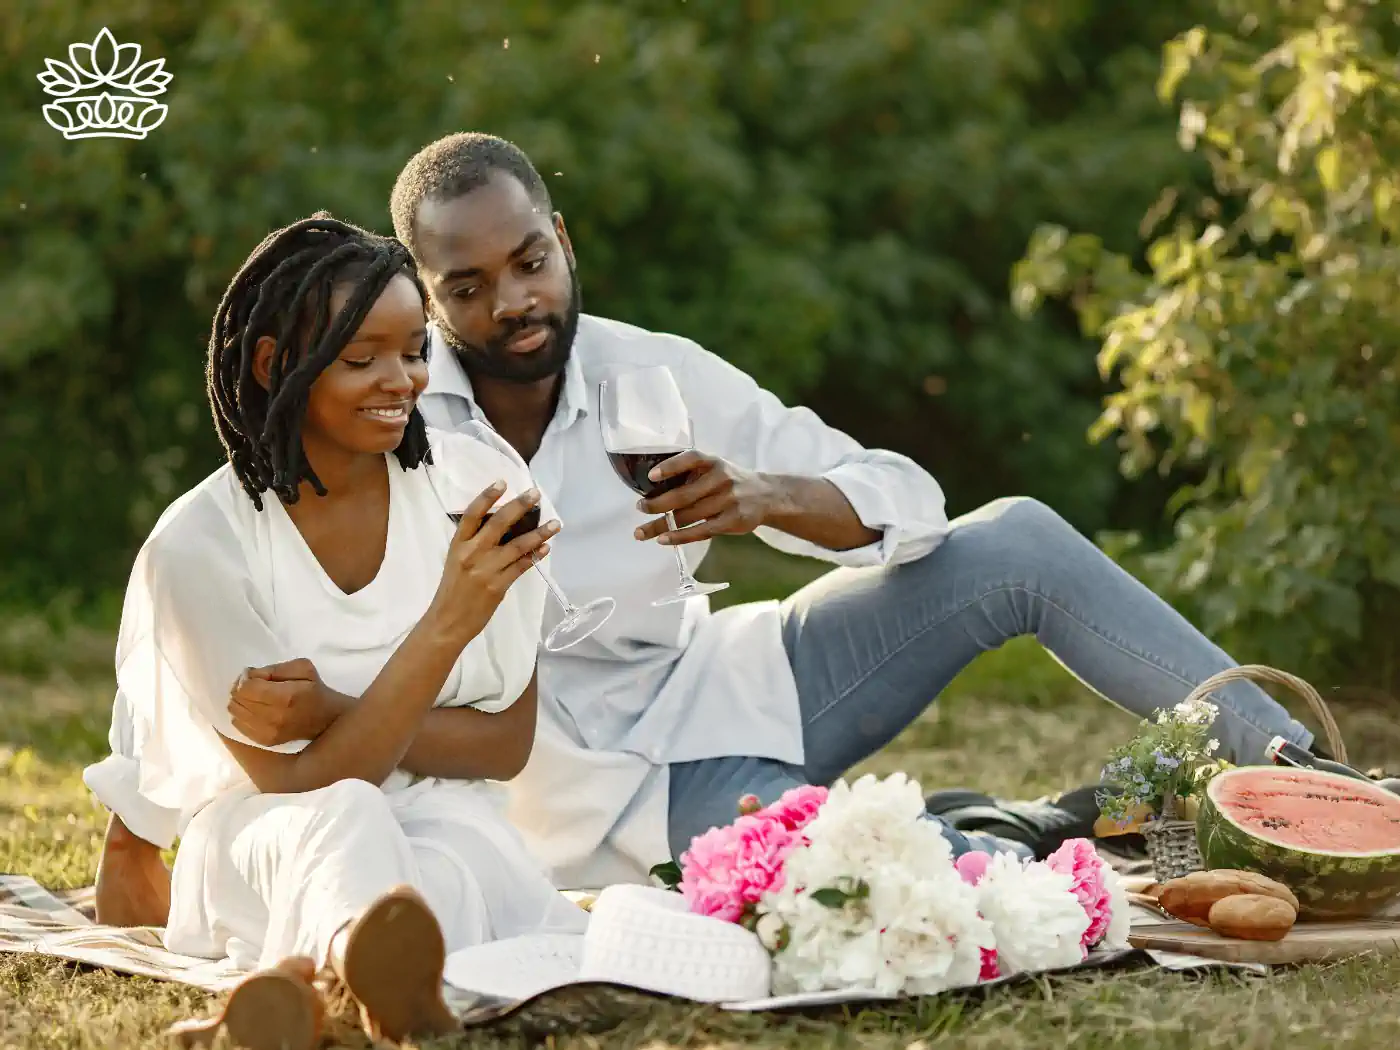 A couple enjoying a romantic outdoor picnic with wine, surrounded by lush greenery and a bouquet of vibrant pink and white flowers. Fabulous Flowers and Gifts delivered with heart. Valentine's Day Flowers.